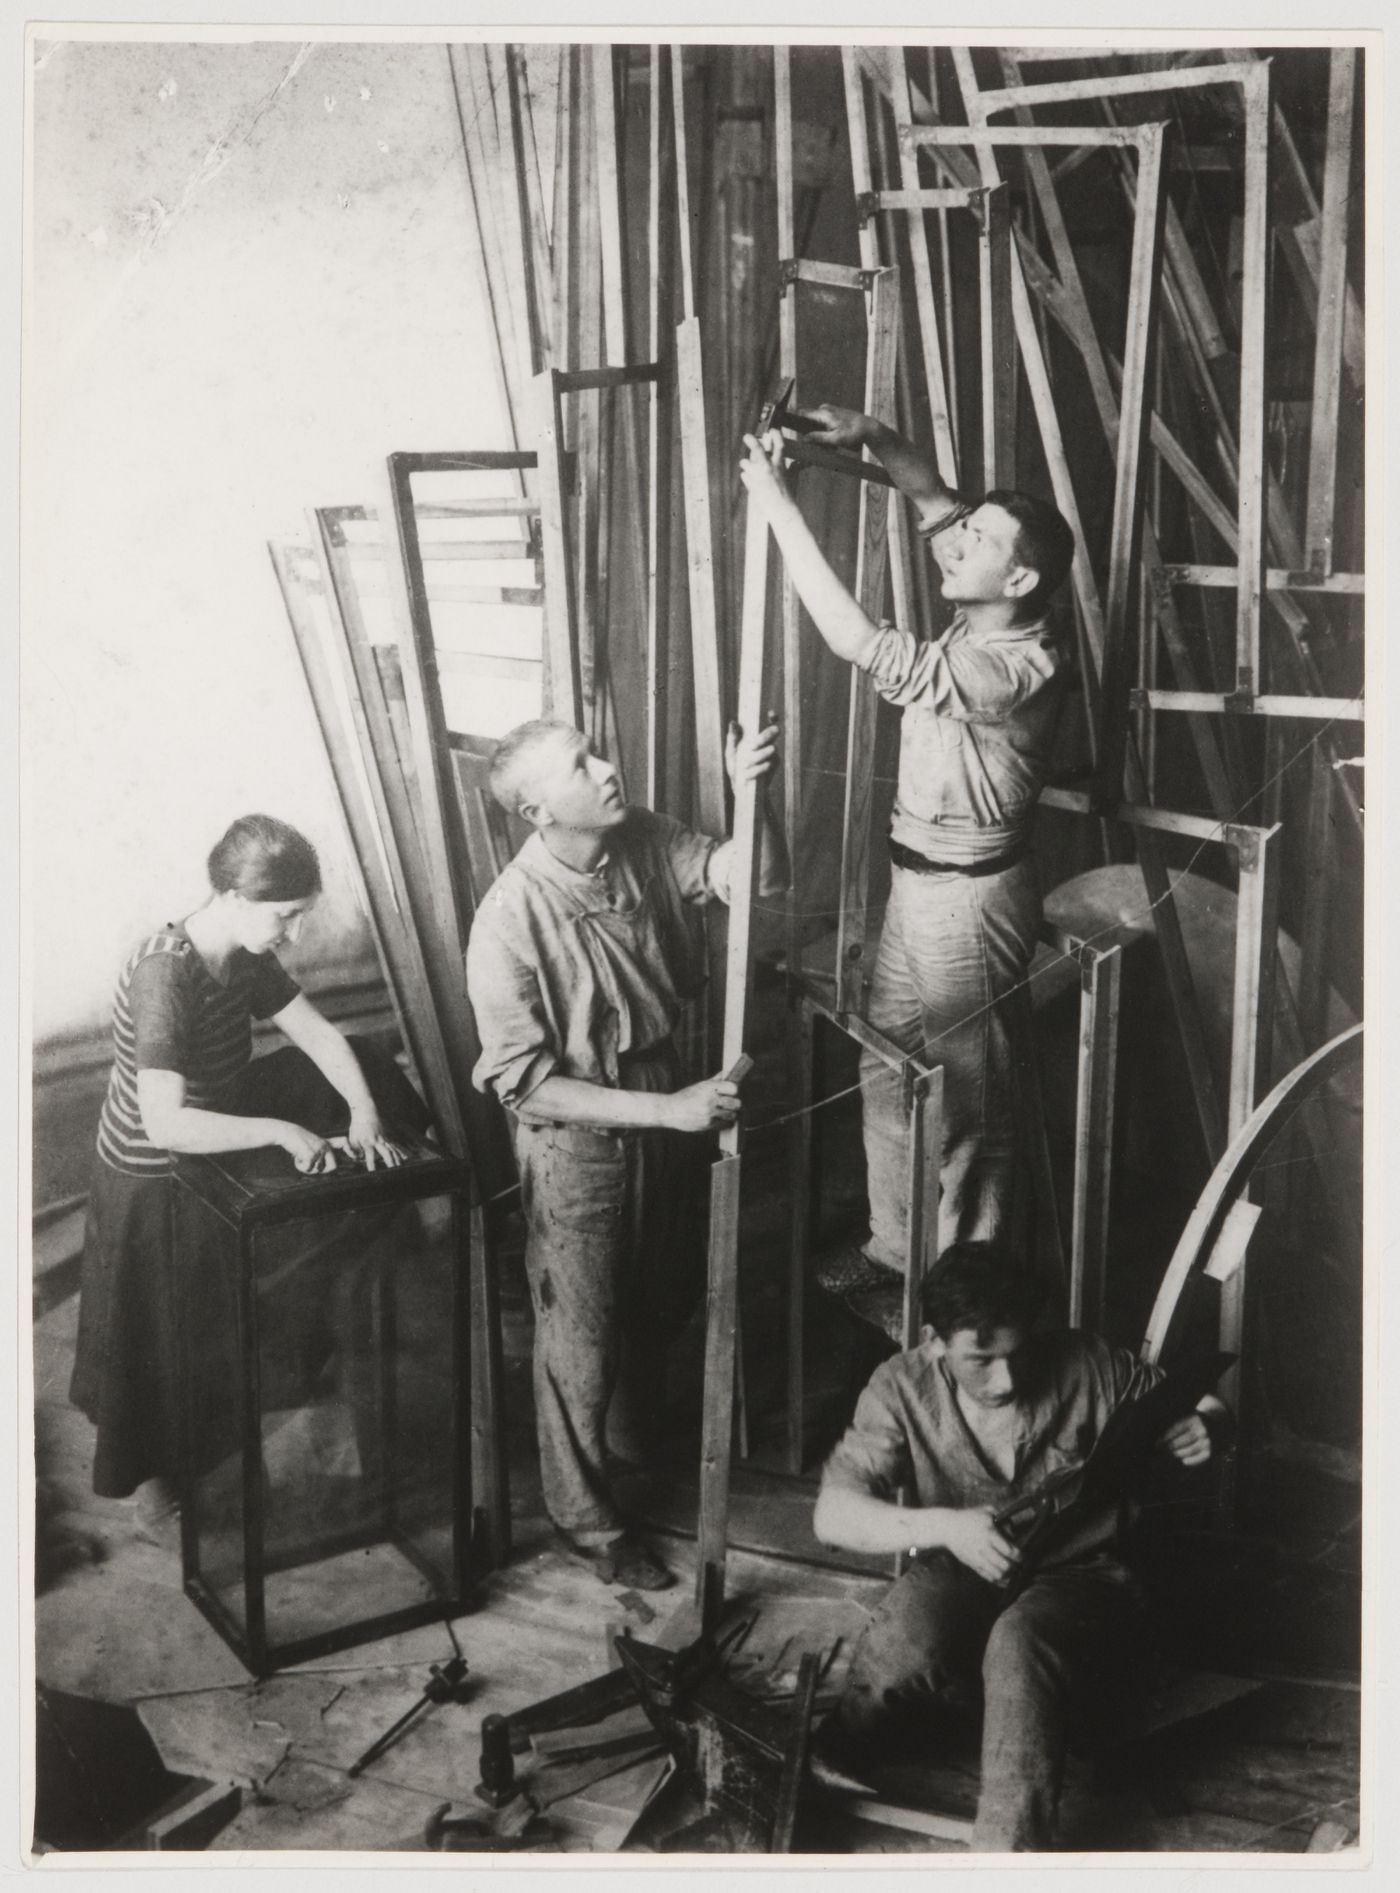 Vladimir Tatlin and his assistants S. Dymshits-Tolstaia, T.M. Shapiro and I.A. Meerzon constructing the first model for the monument to the Third International, Petrograd (now Saint Petersburg)